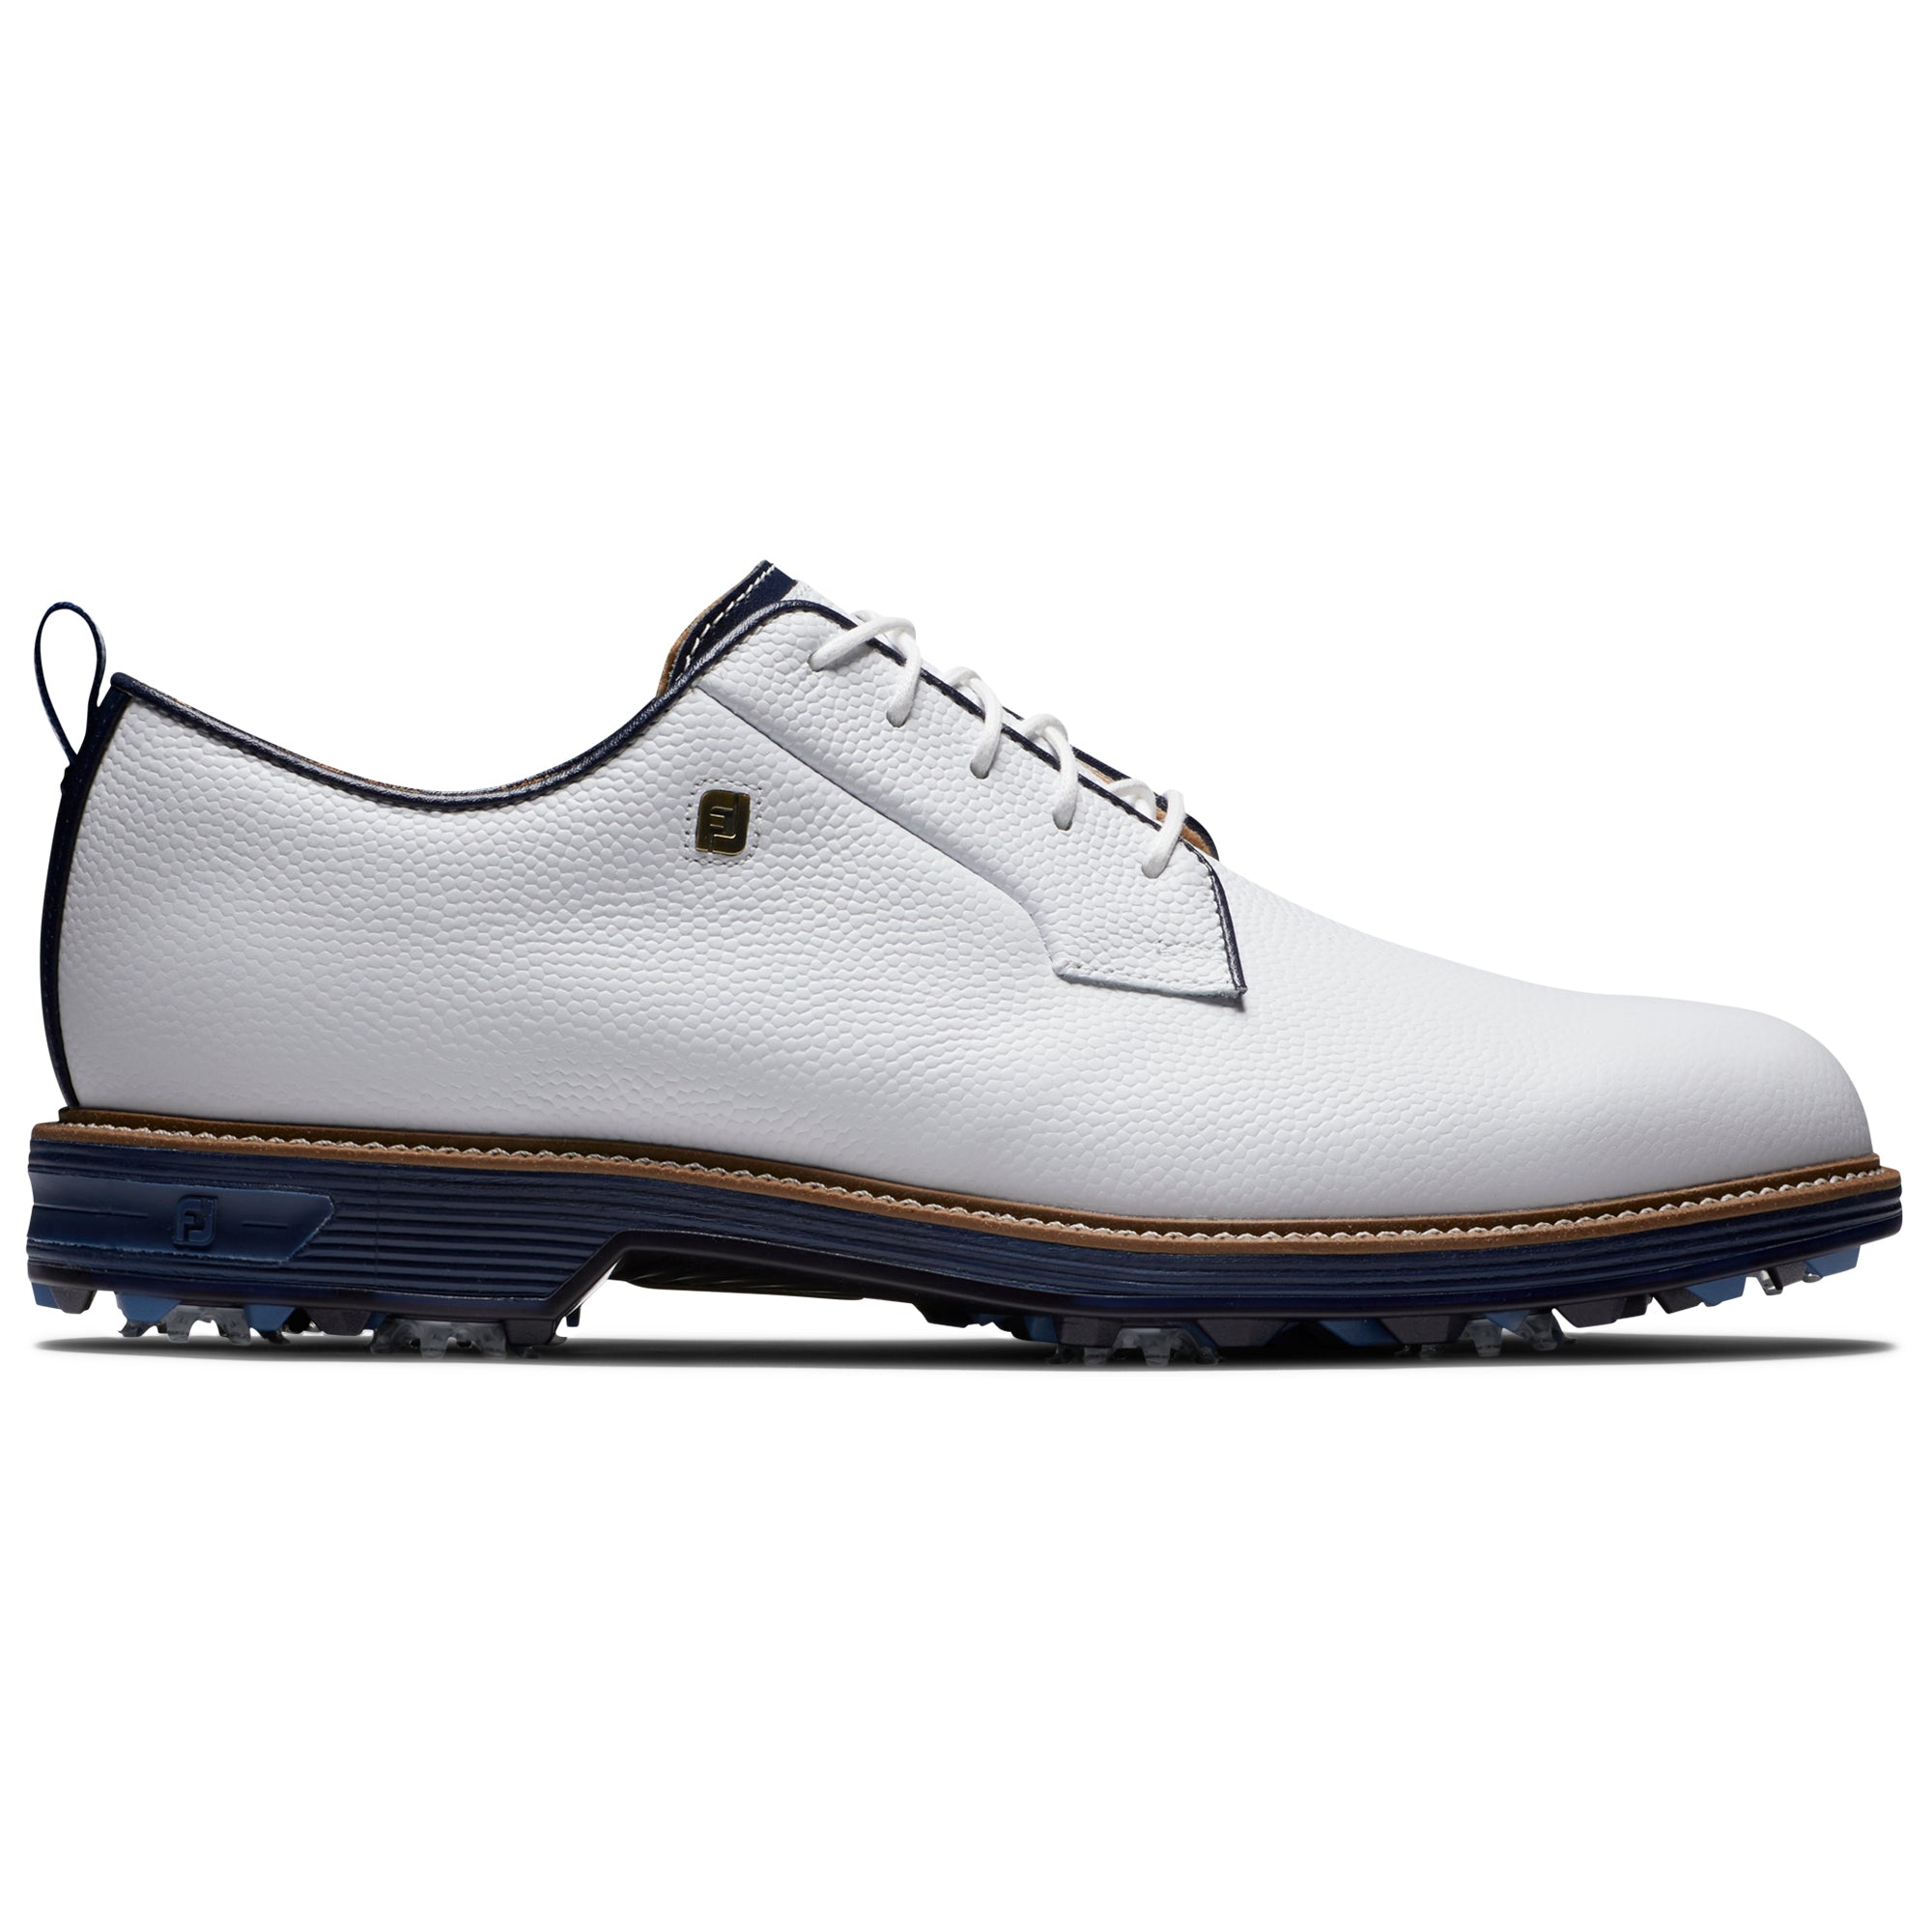 FootJoy Premiere Series Field Golf Shoes 54396 White Navy | Function18 ...